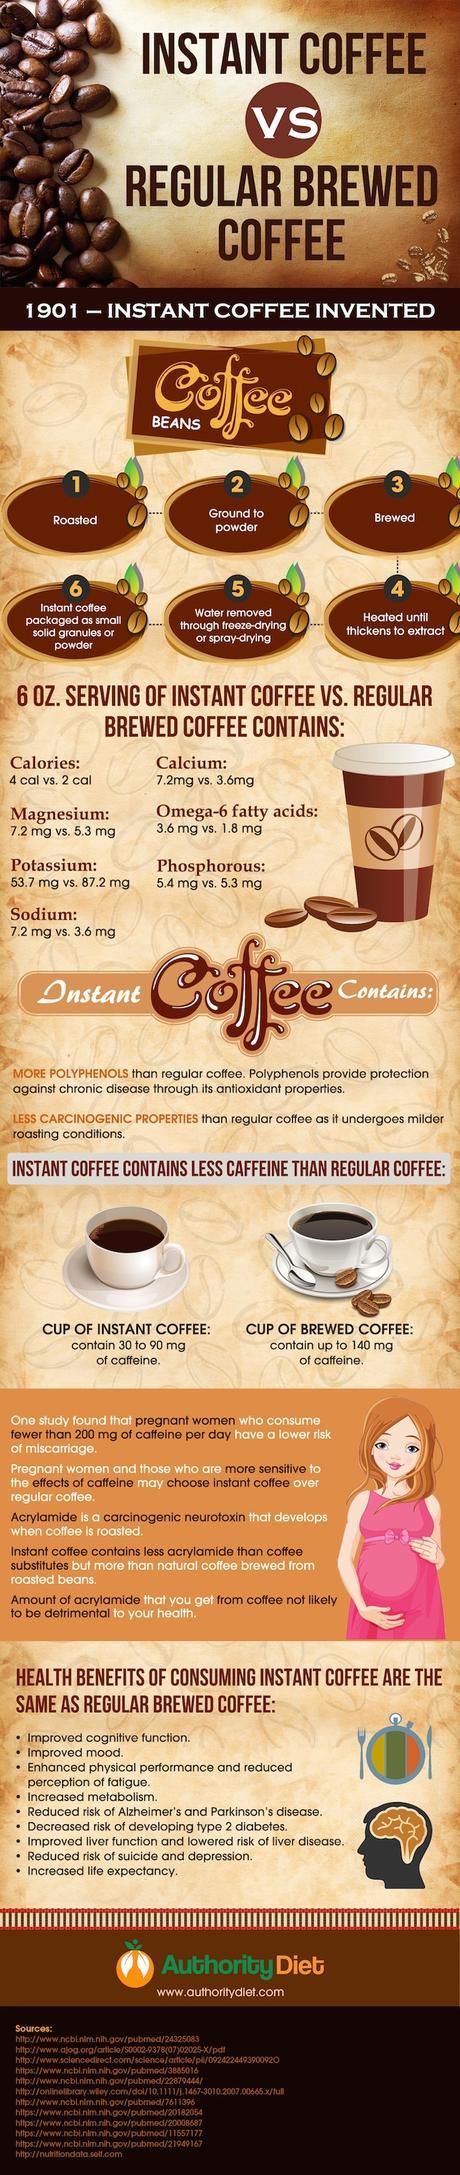 instant coffee vs. brewed coffee infographic